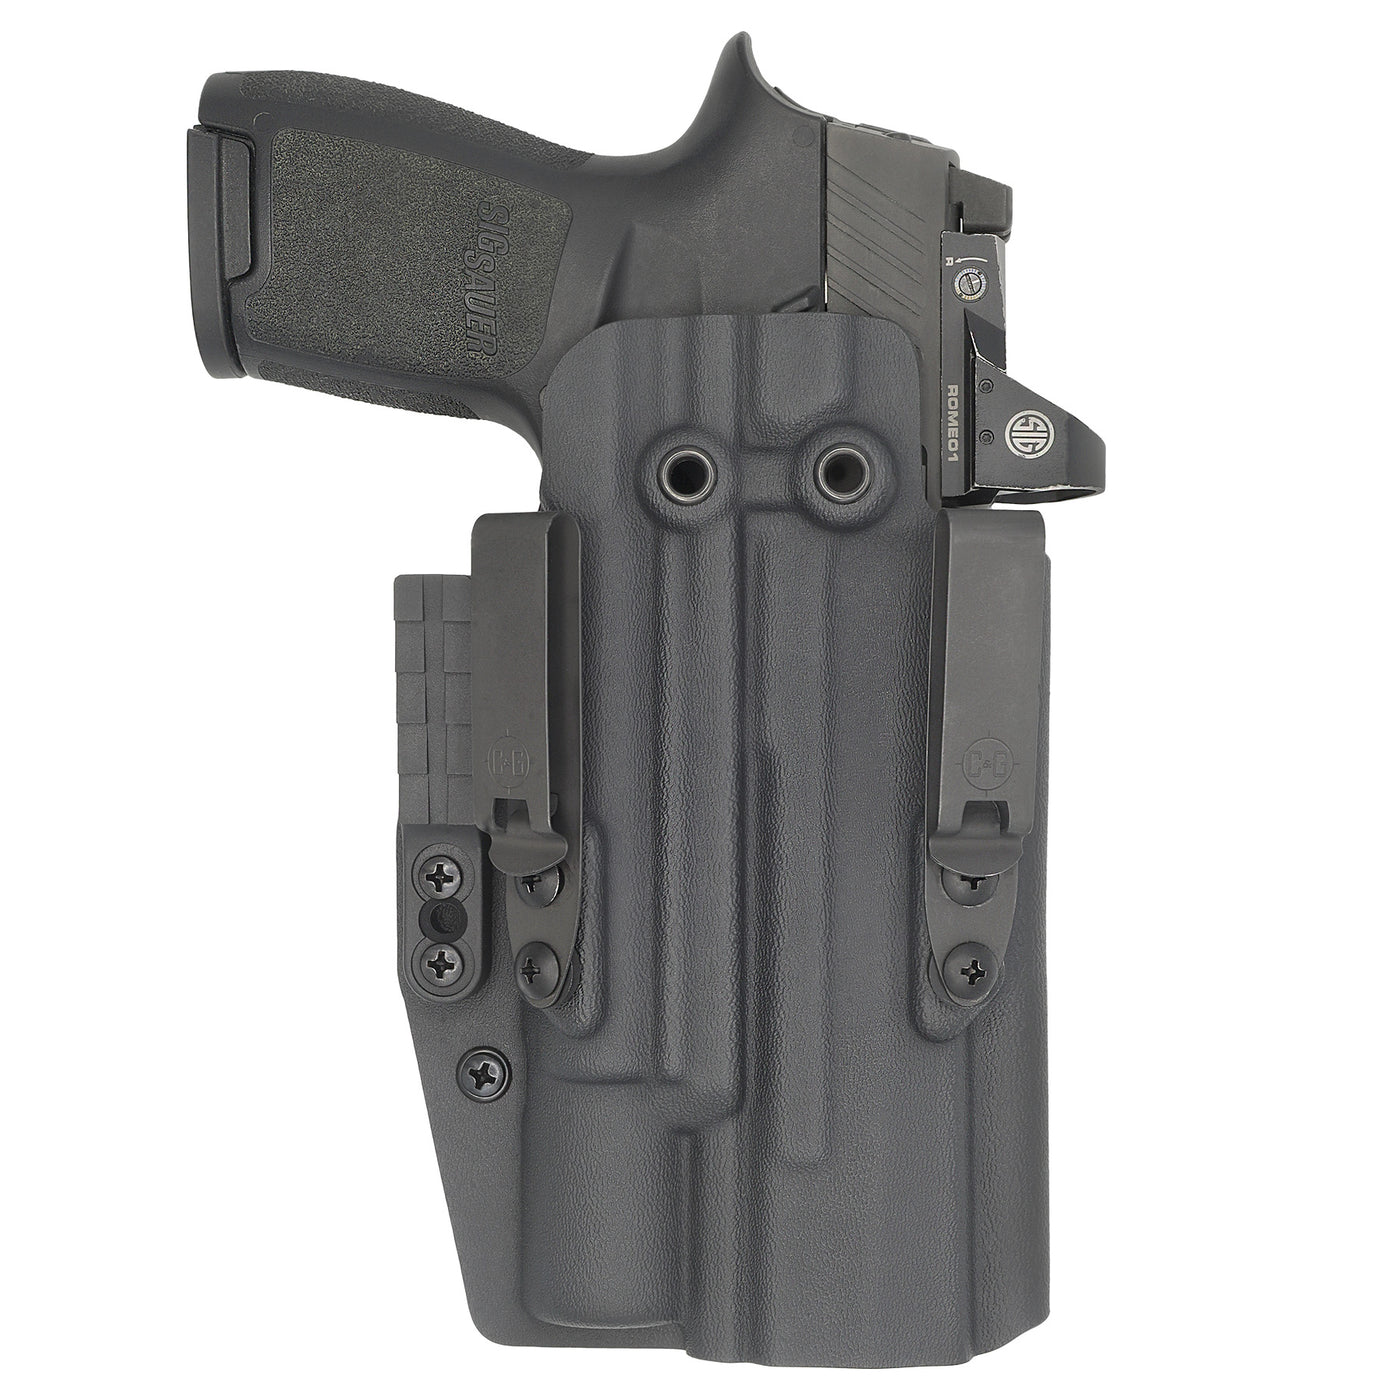 C&G Holsters custom IWB ALPHA UPGRADE Tactical H&K 45/c Surefire X300 in holstered position